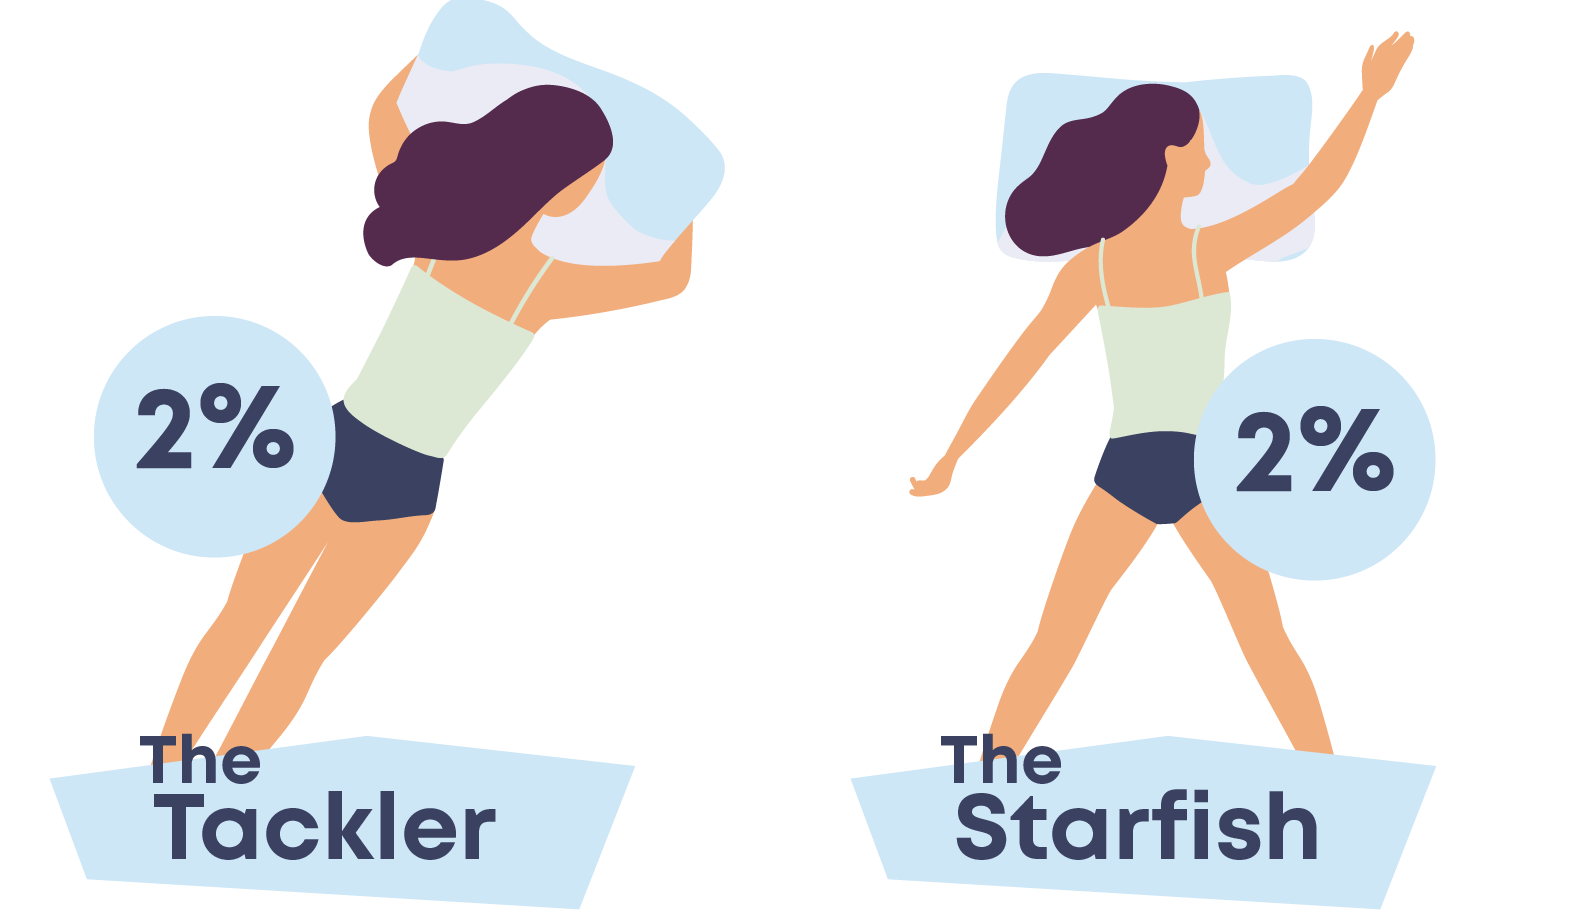 Illustration of the tackler and starfish sleeping positions